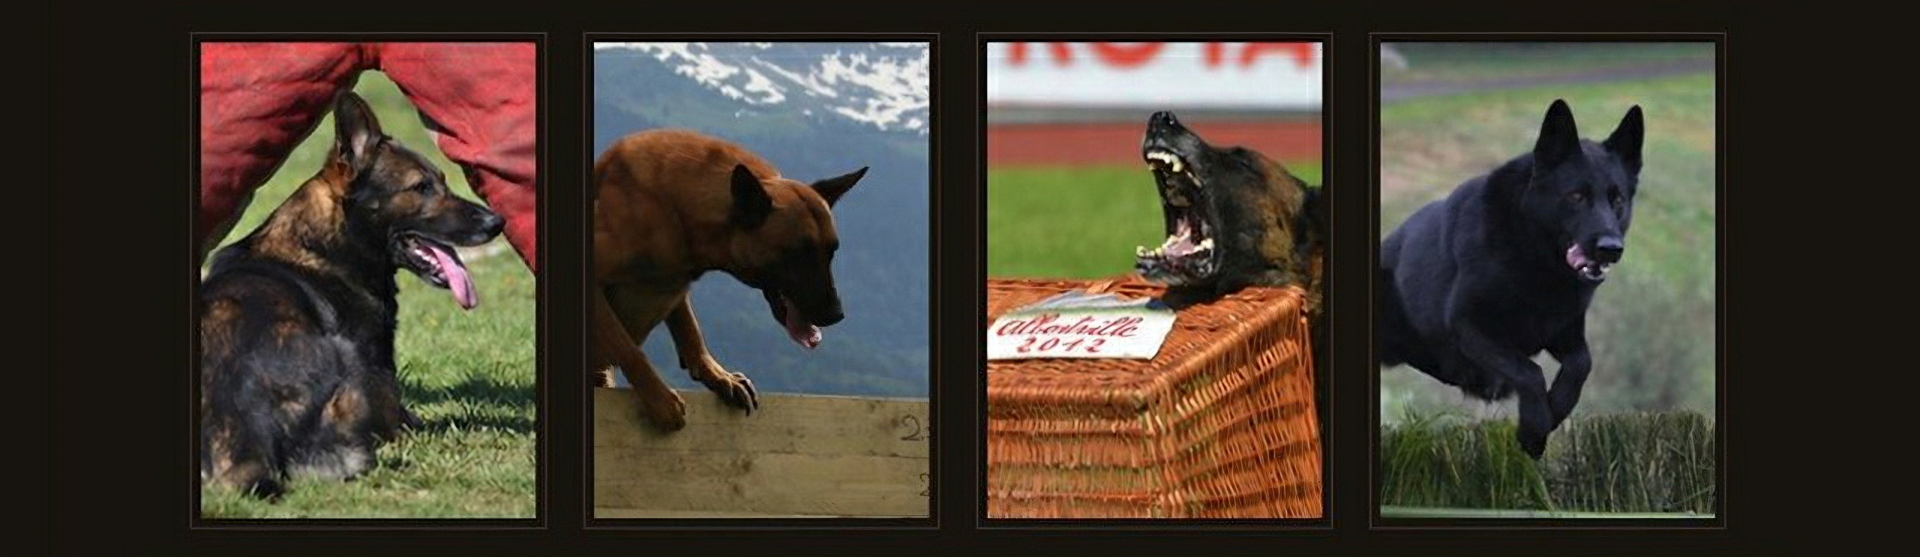 banniere archives sports canins